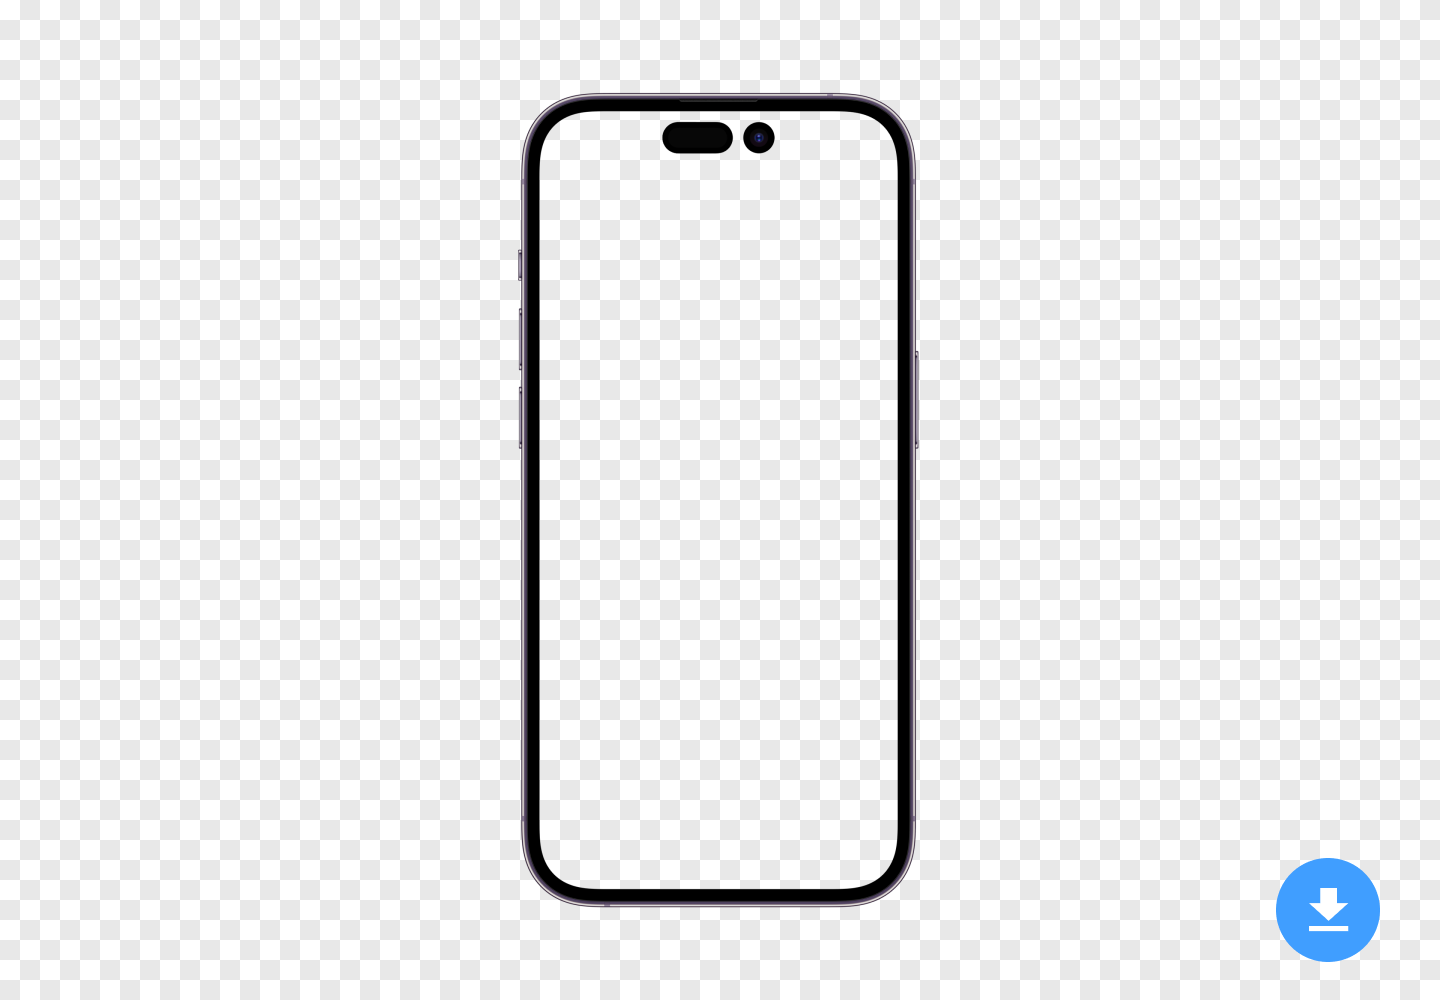 Free HD mockup of Apple iPhone 14 PRO (2022) in PNG and PSD image format with transparent background